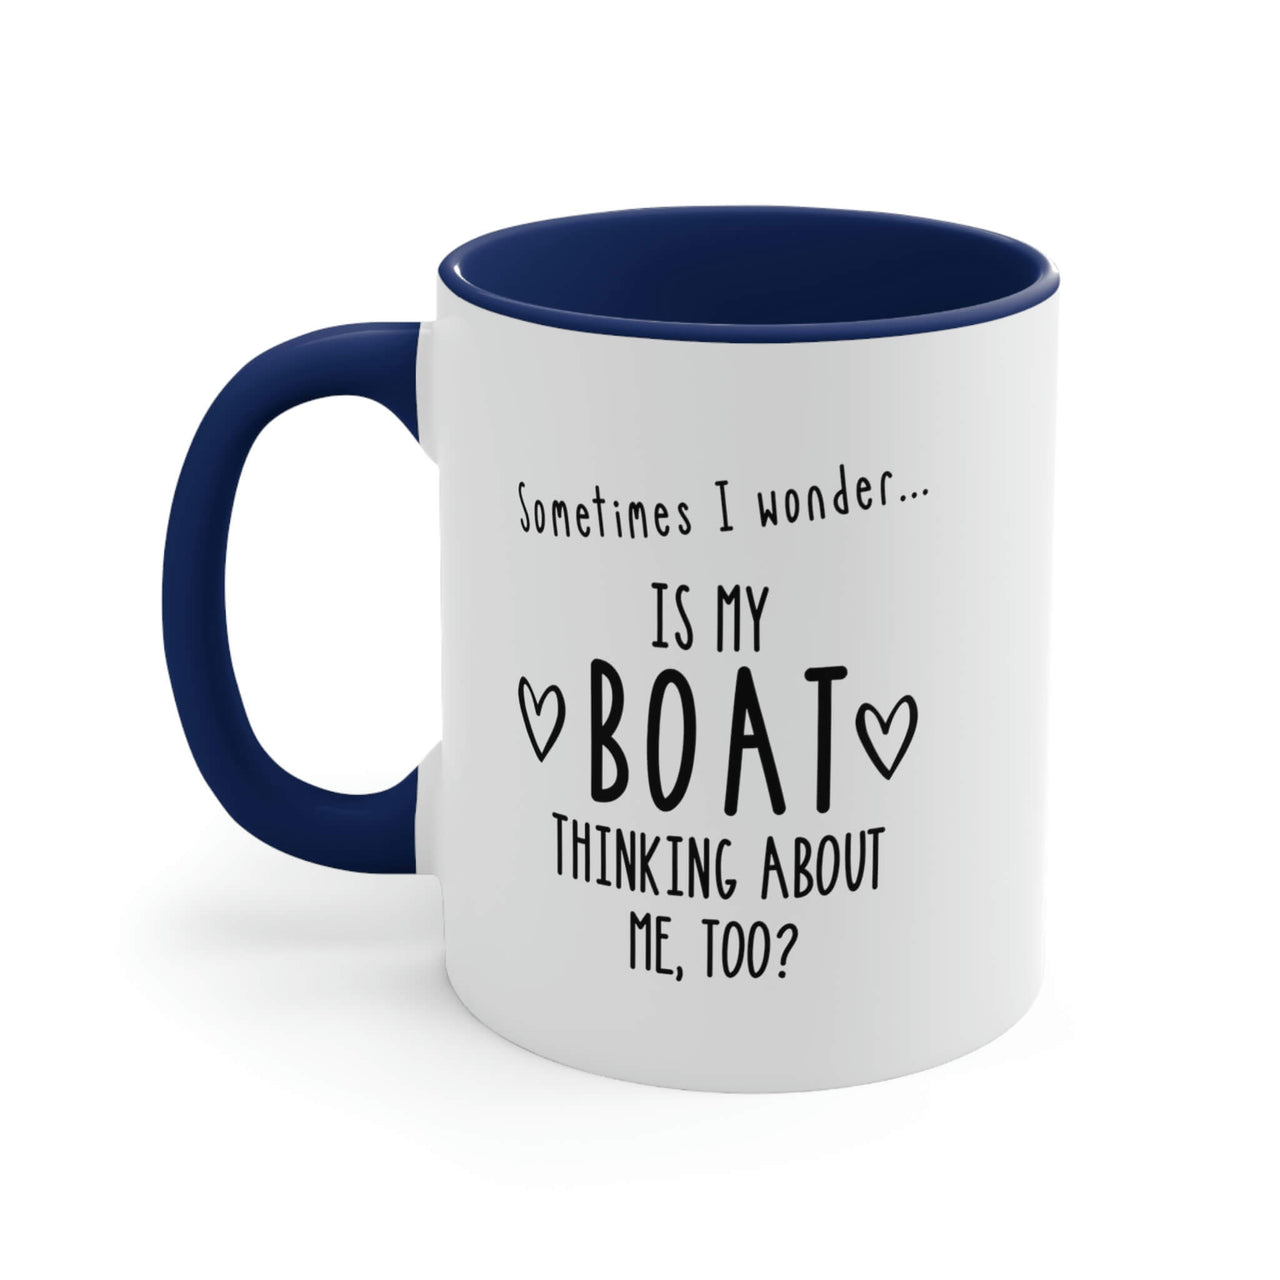 Is My Boat Thinking About Me Too Ceramic Coffee Mug, 5 Colors Mugs New England Trading Co Navy  